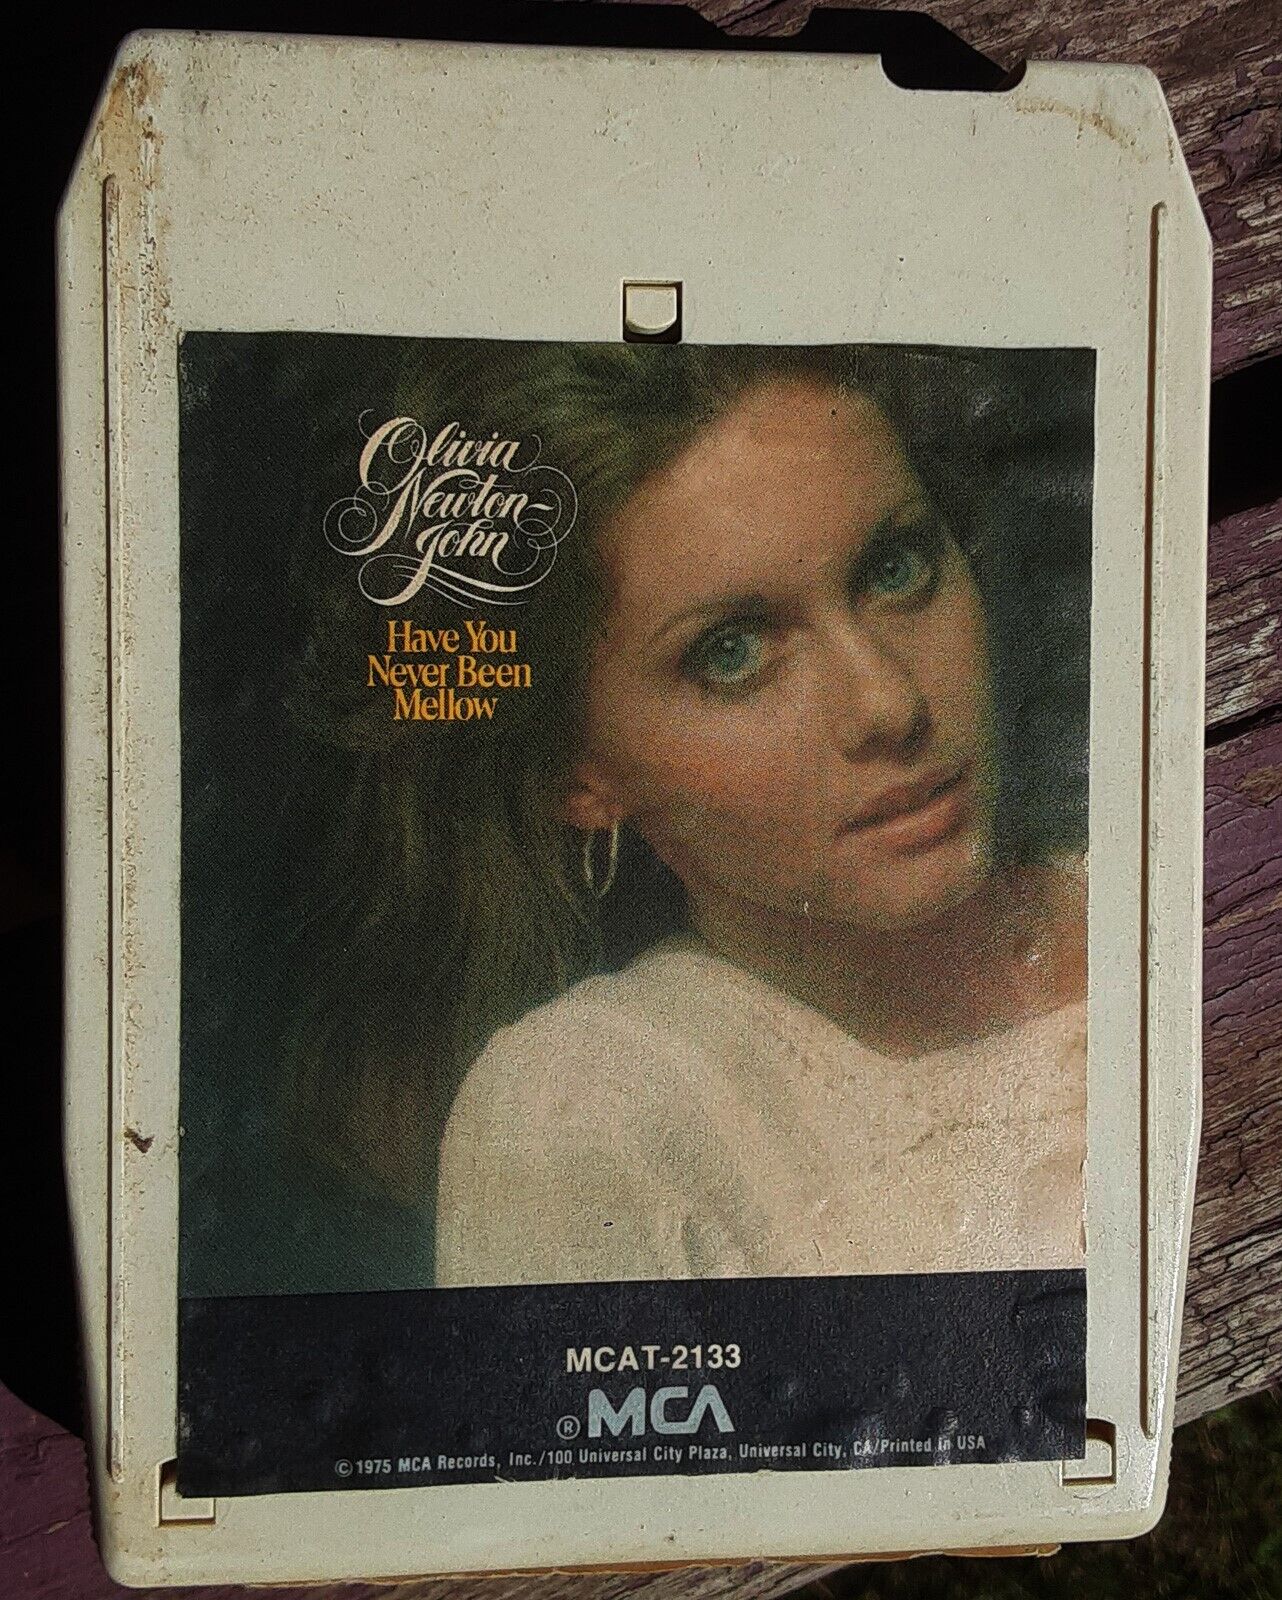 Olivia Newton John 8-Track - Have You Never Been Mellow Без бренда